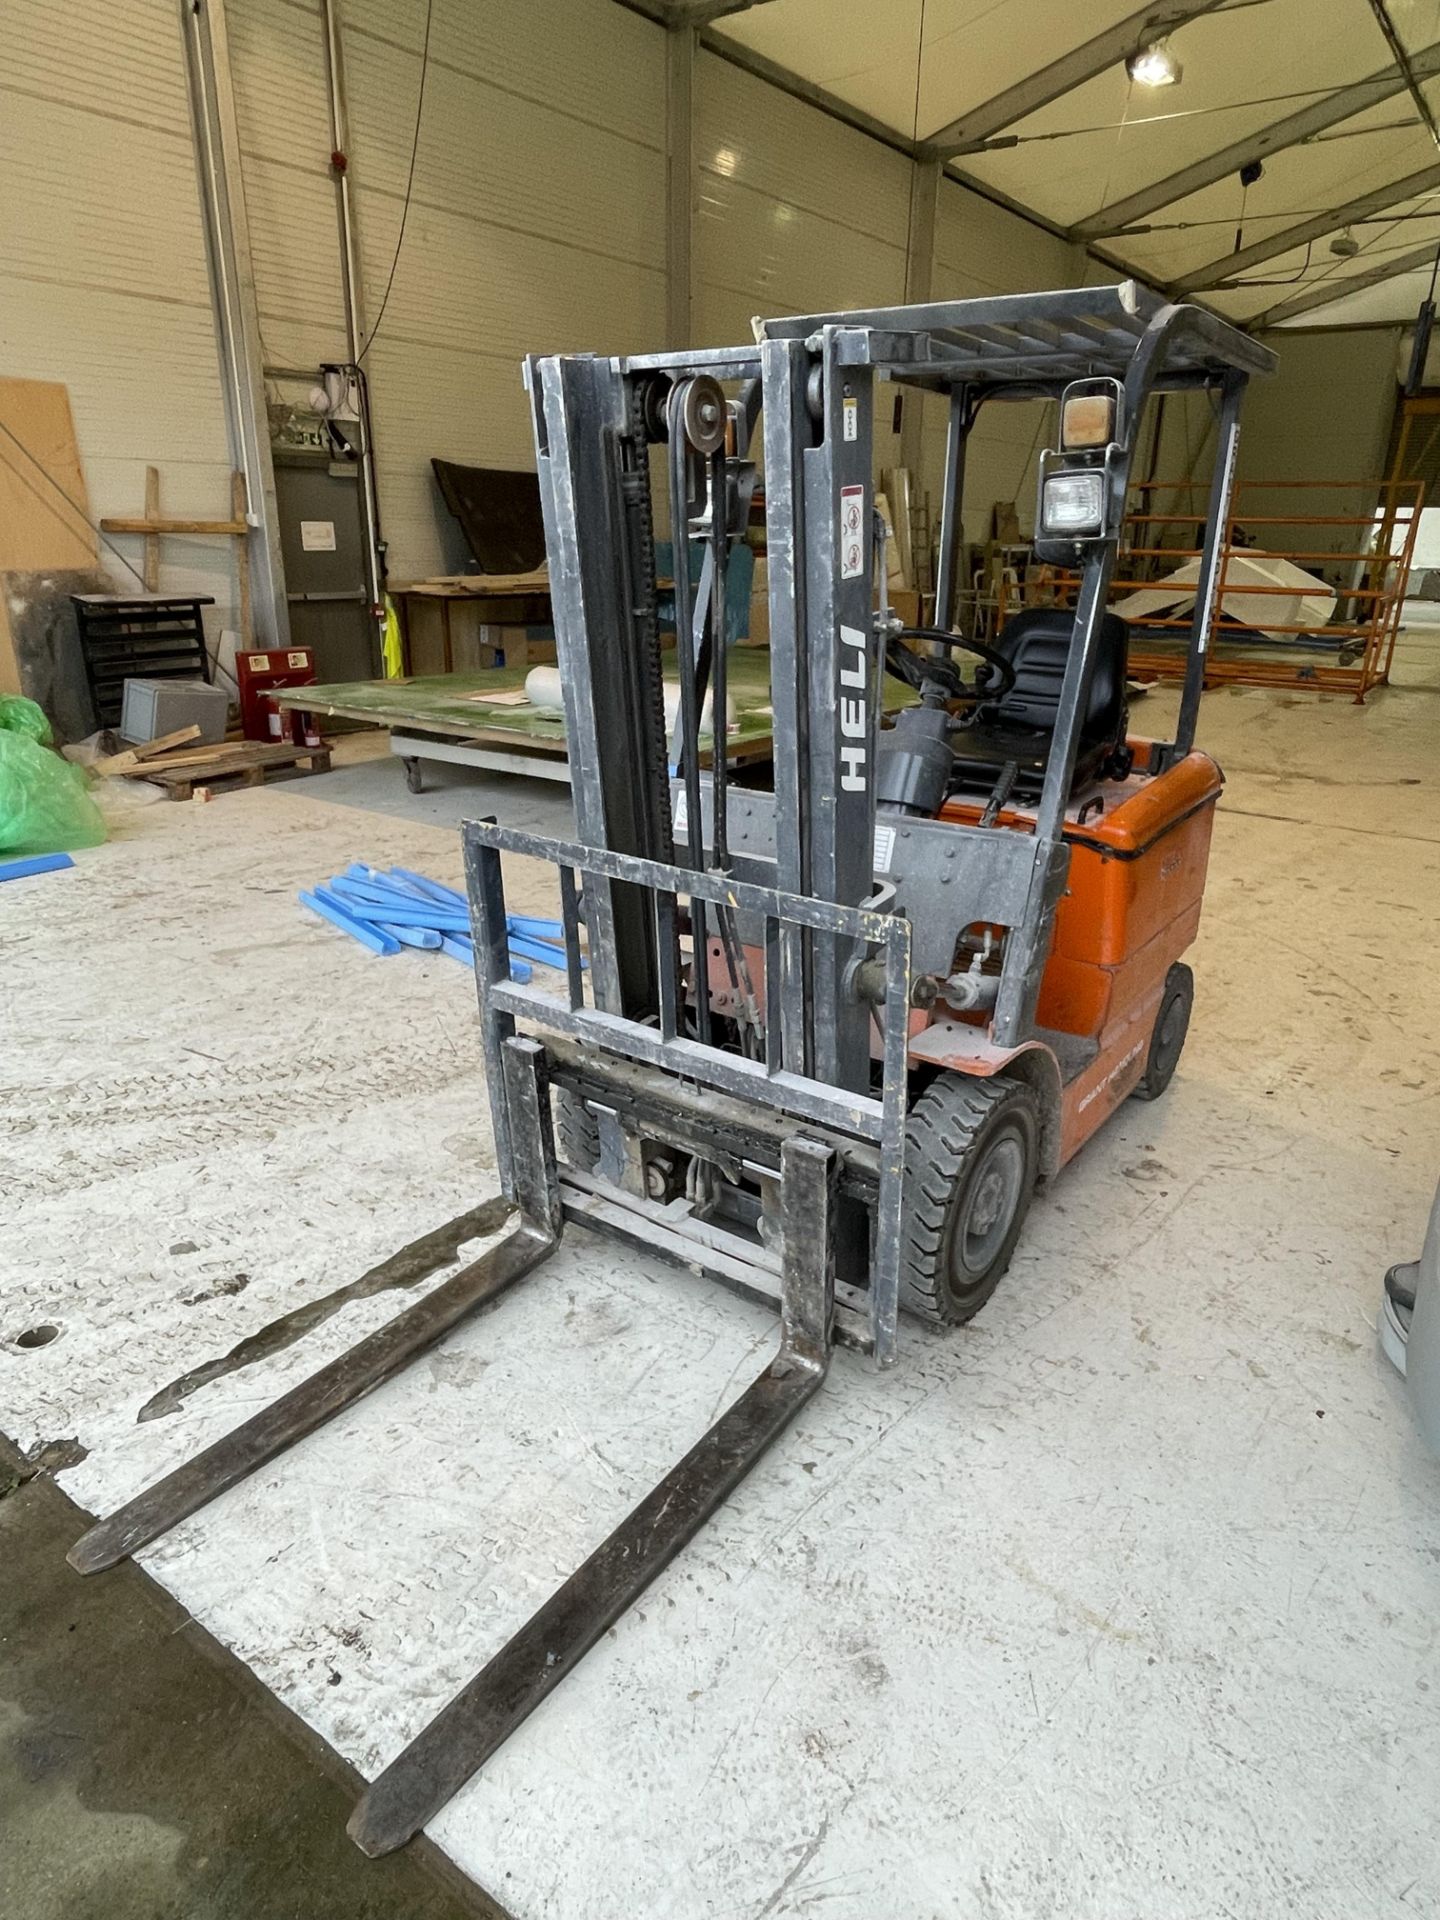 2008 Heli Model HBF15 1500KG Rated Electric Doubemast Forklift S/No. E3611, Odometer Reading: 1279 - Image 4 of 14